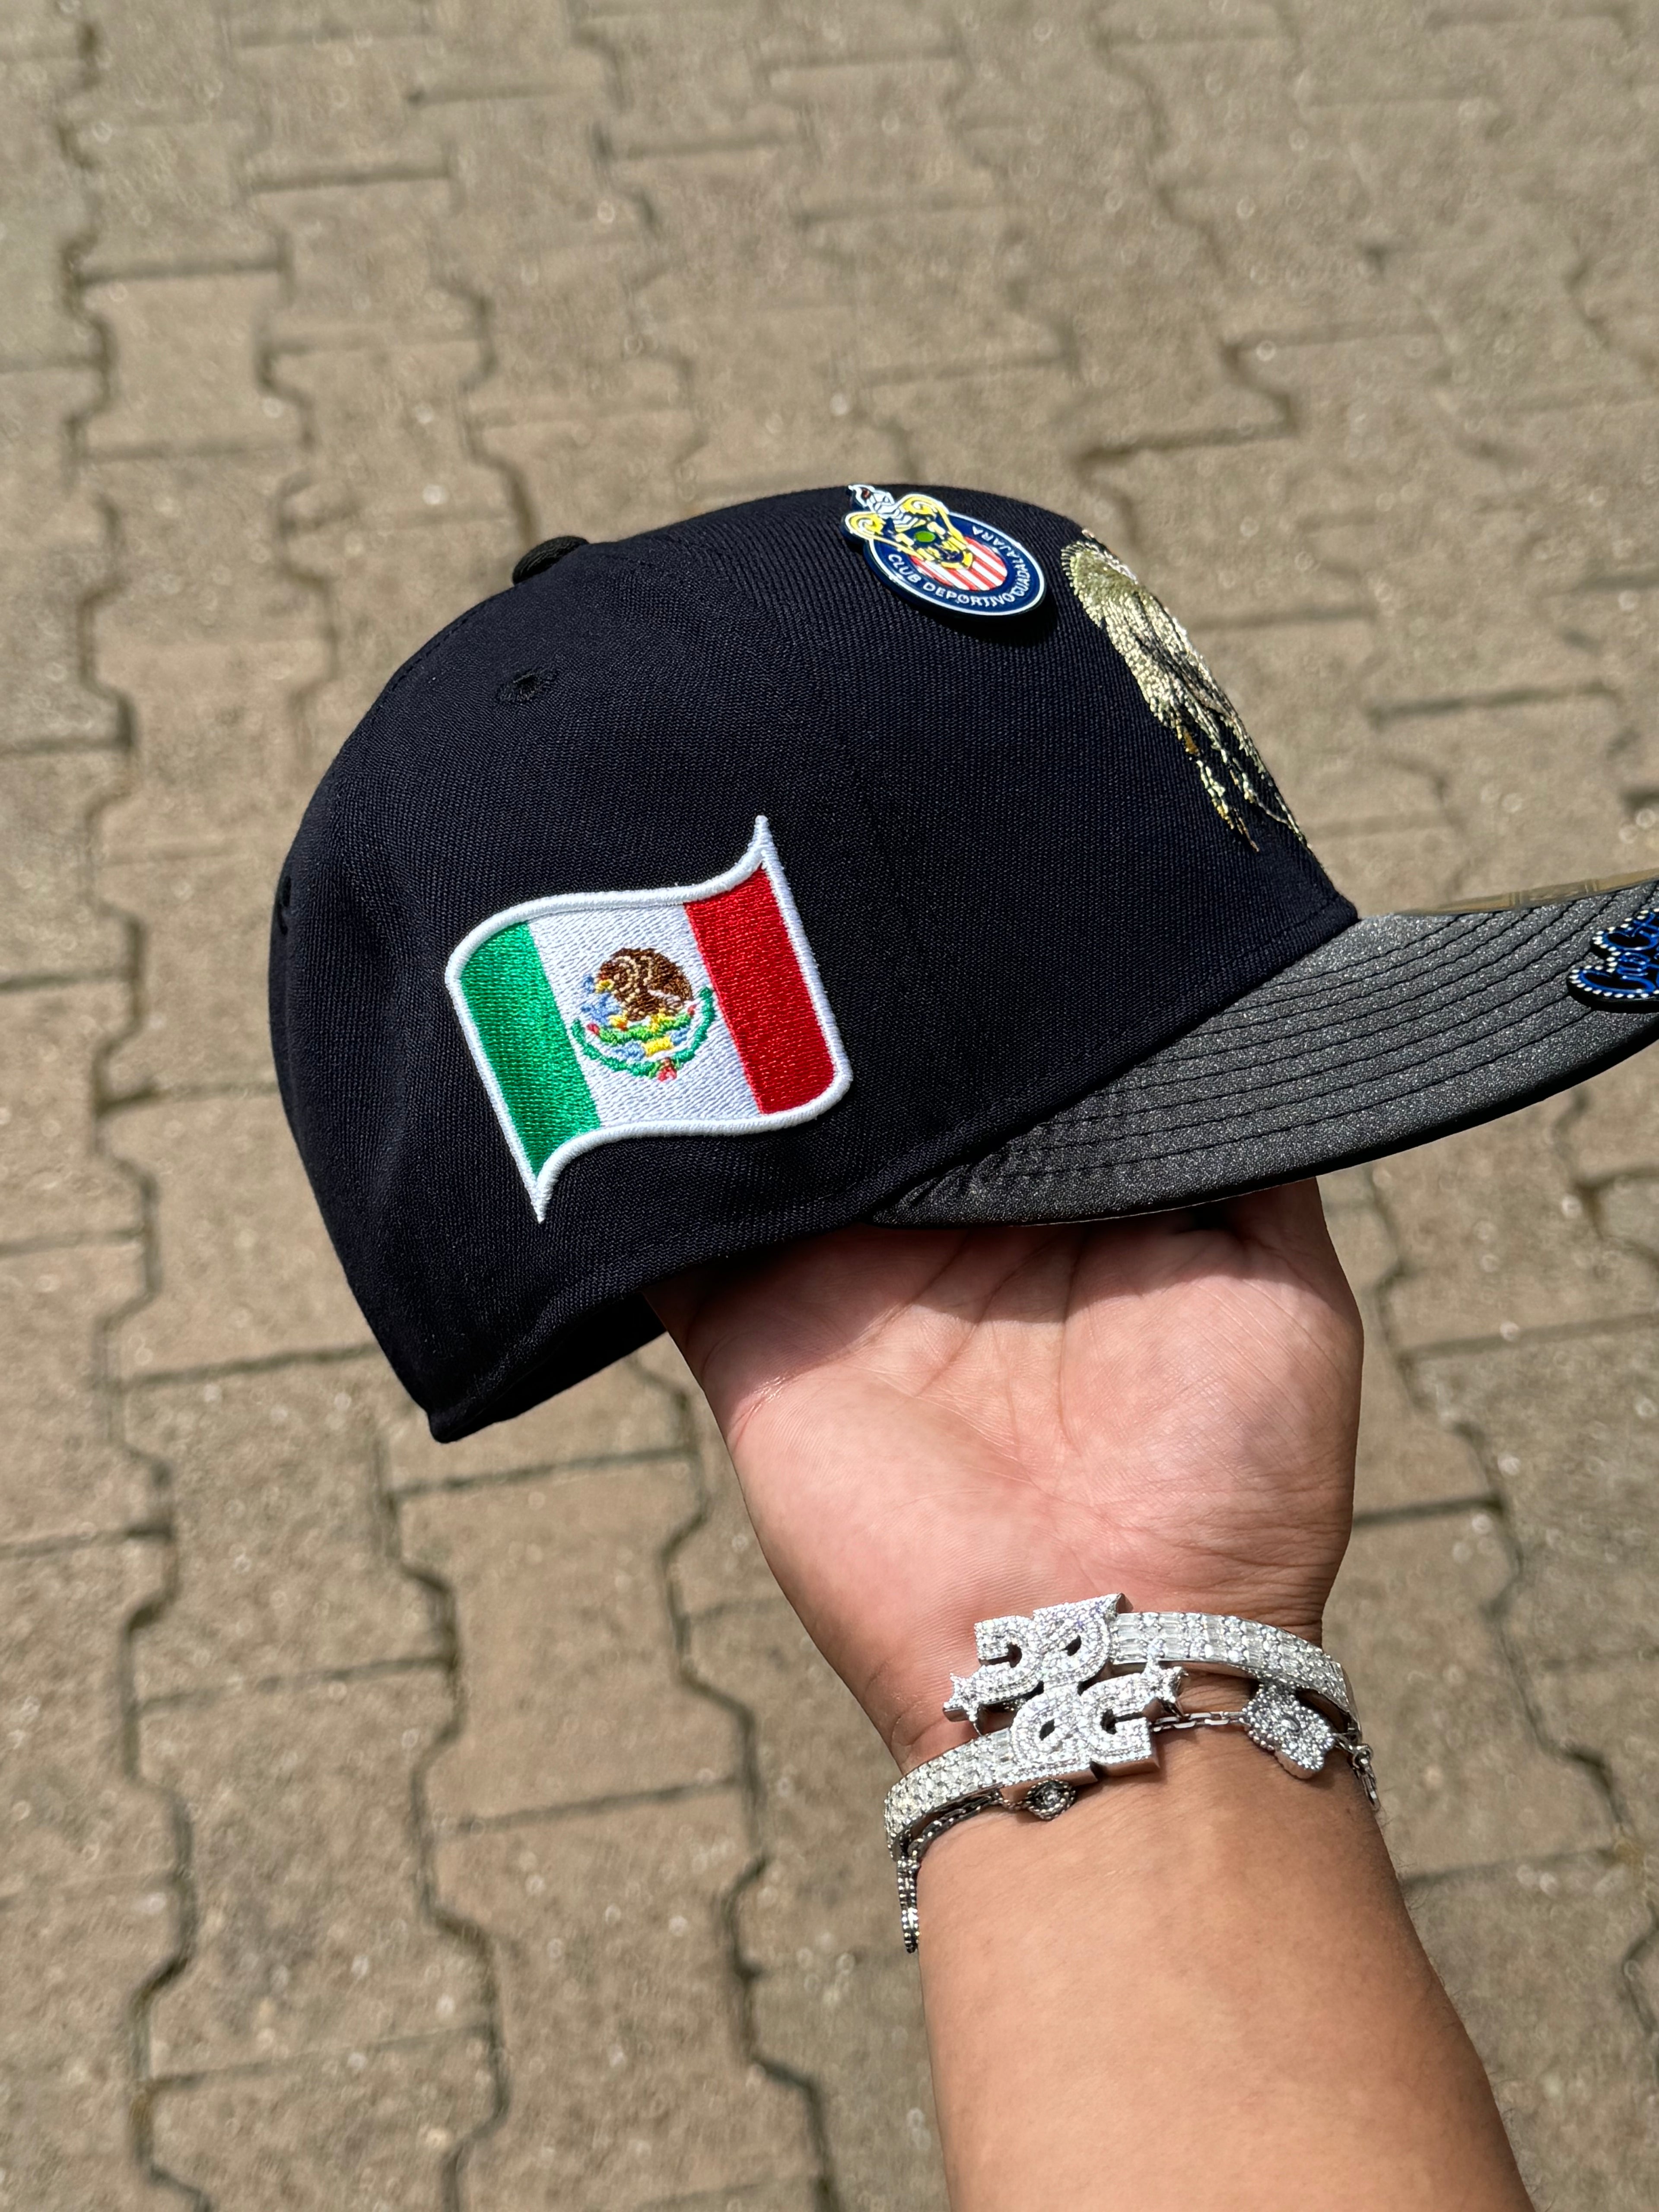 NEW ERA EXCLUSIVE 59FIFTY NAVY/SATIN MEXICO "THE GOAT" W/ MEXICO FLAG PATCH